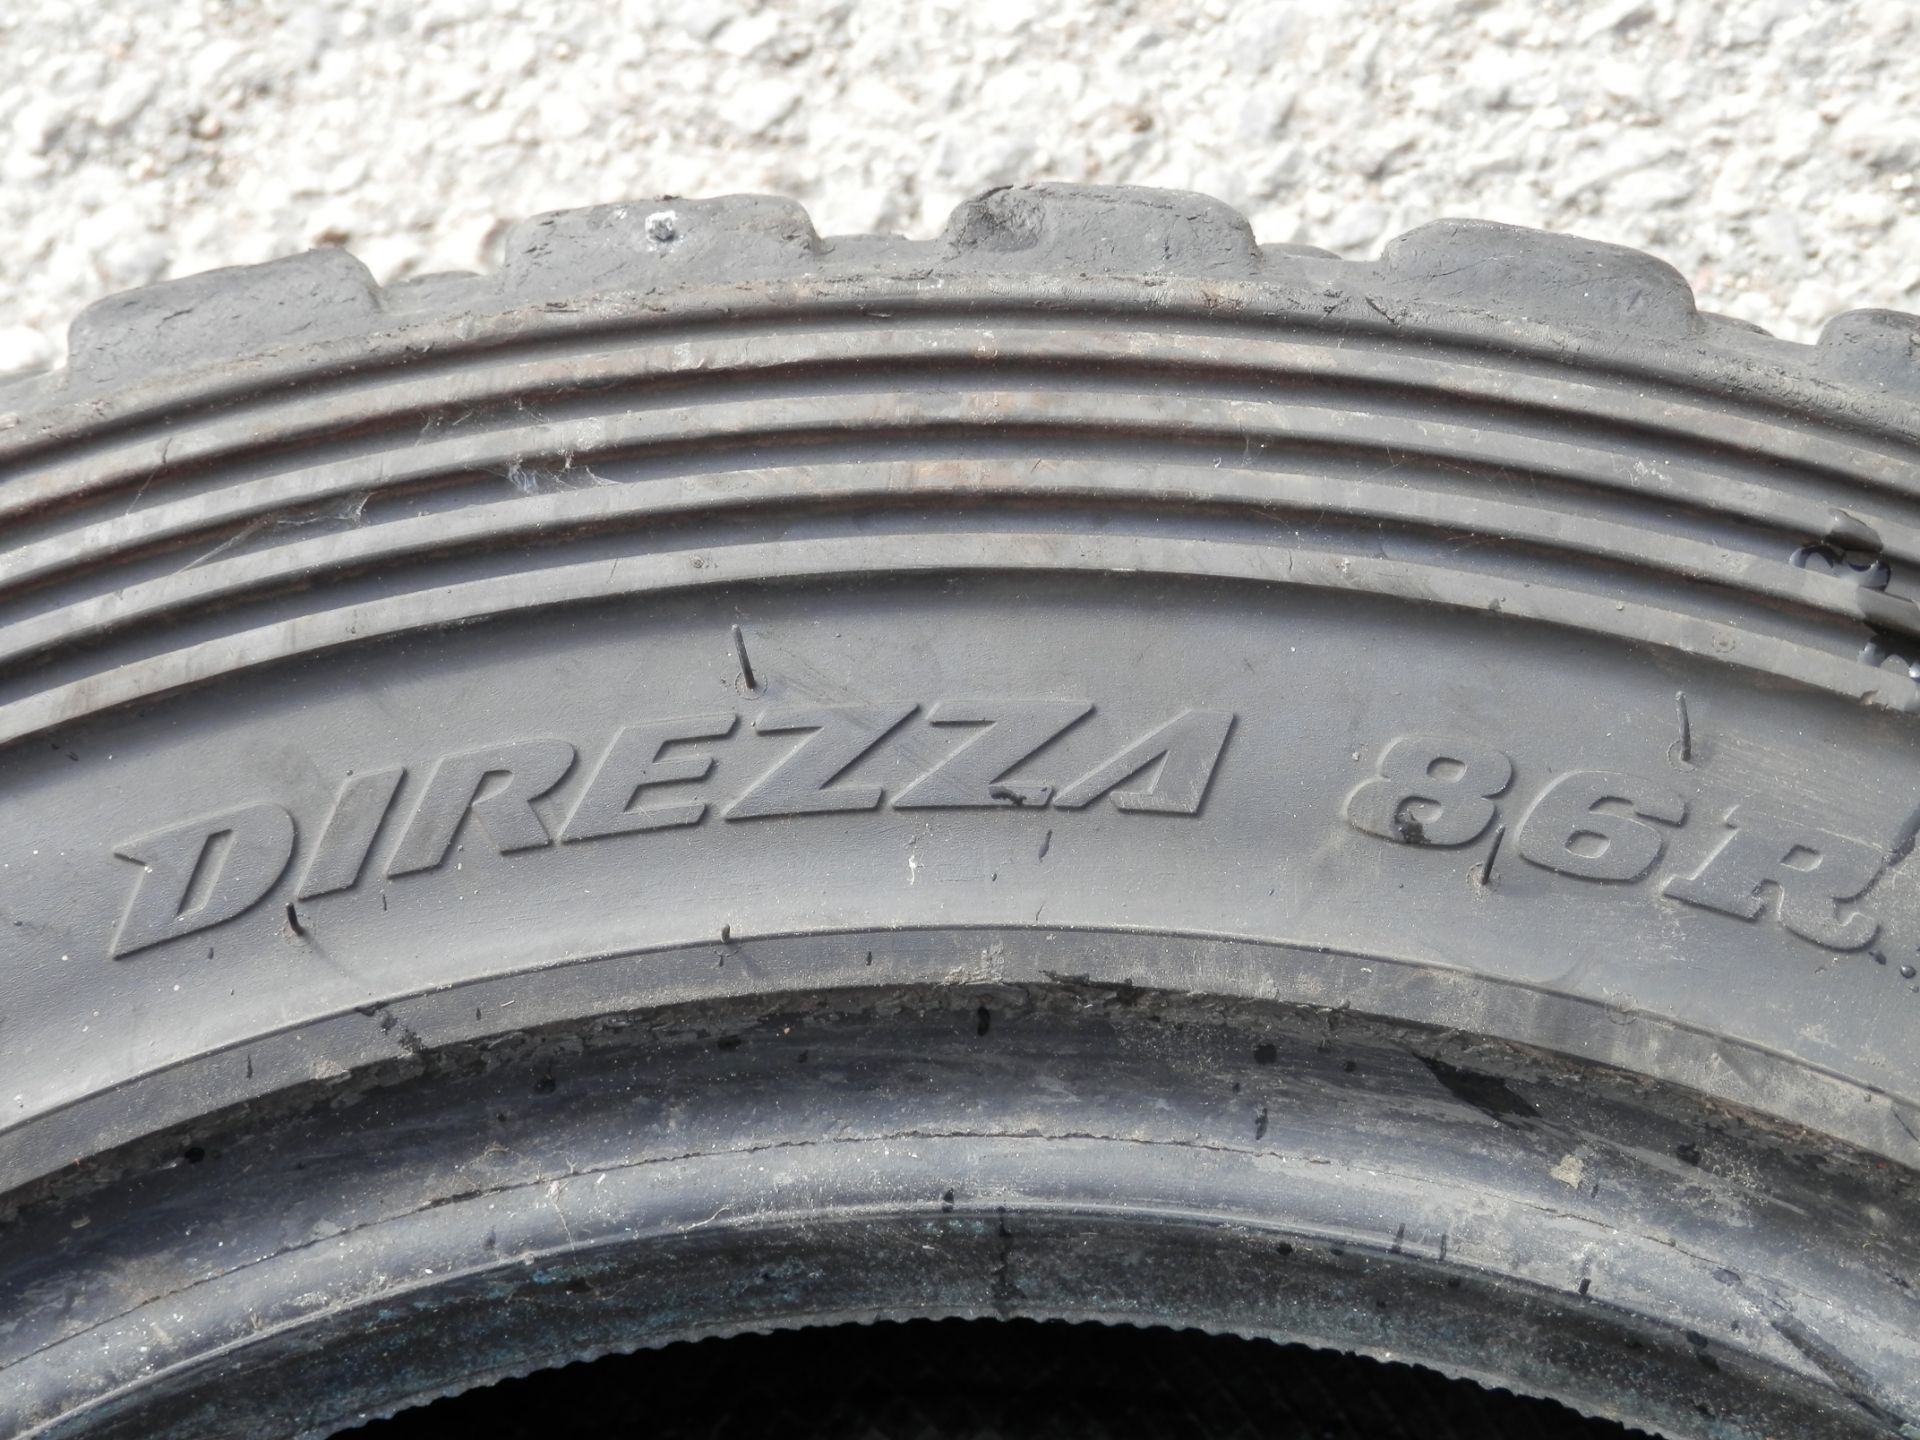 4 X DUNLOP DIREZZA RALLYE/OFF ROAD TYRES, 185/65/15 FROM A 2000 MITSUBISHI EVOLUTION. - Image 7 of 8